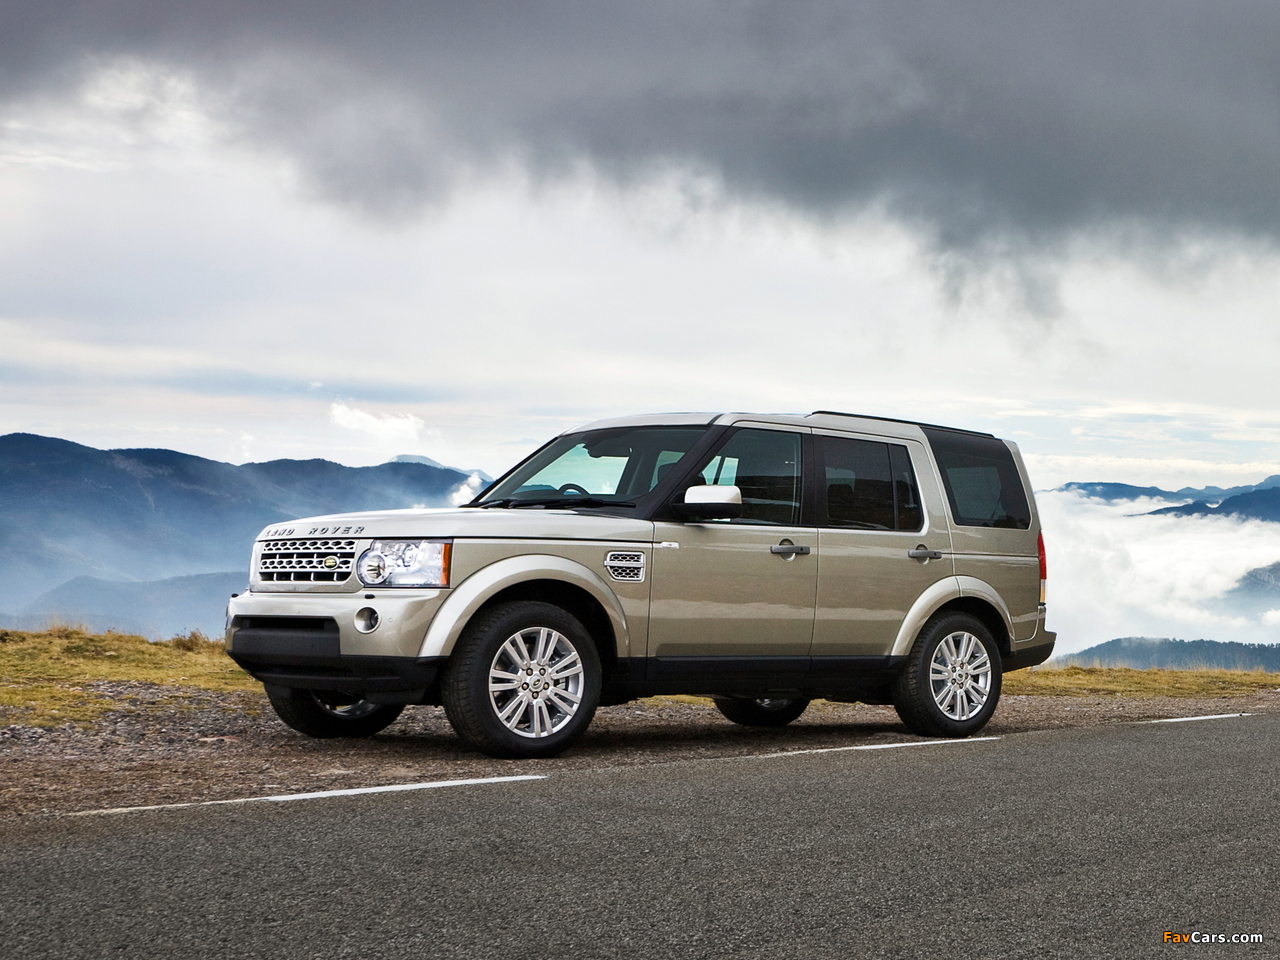 Land Rover Discovery 4 3.0 TDV6 UK-spec 2009 wallpapers (1280 x 960)